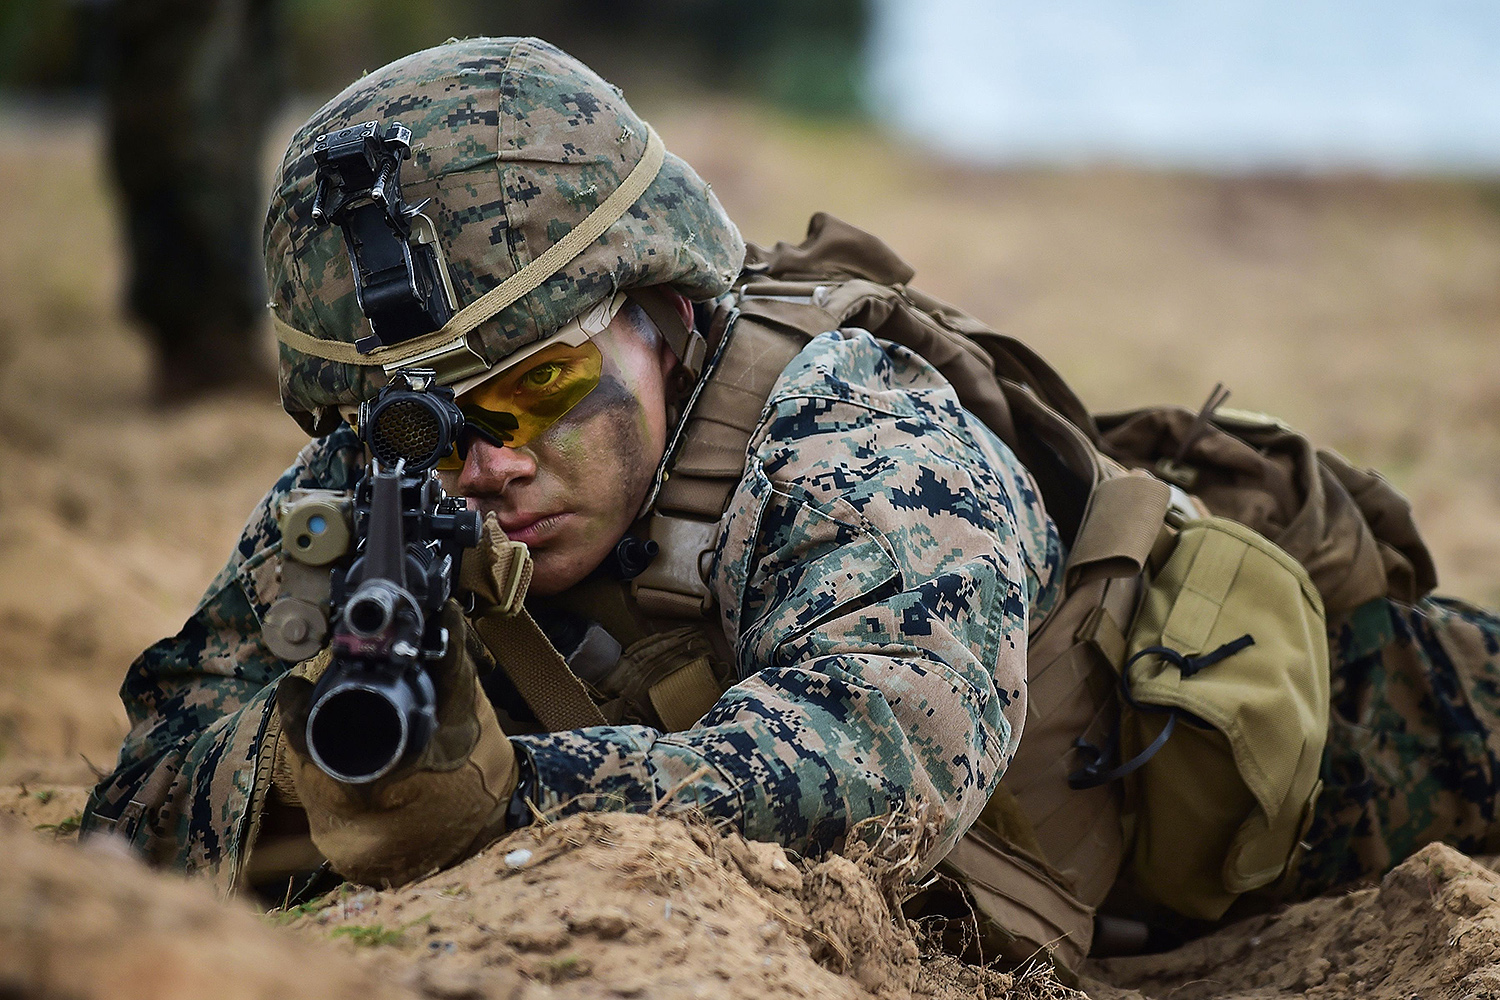 A US Marine takes position during the joint Cobra Gold exercise in the coastal Thai province of Rayong on February 28, 2020